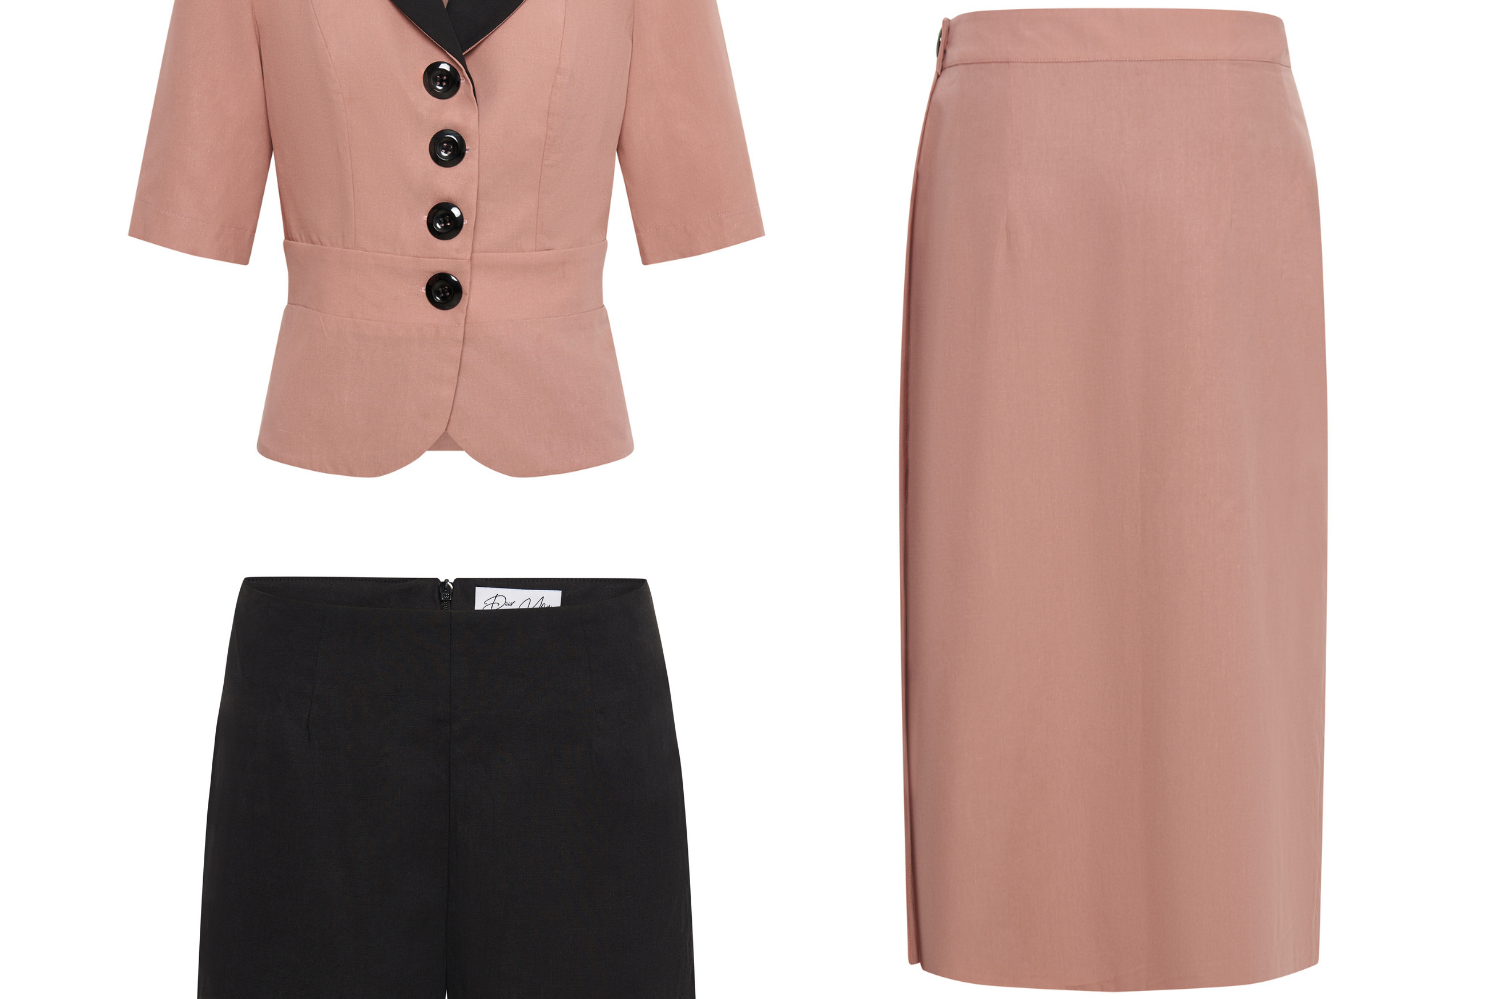 Iris Igniting 3 piece Set consisting of Jacket, Shorts and Skirt in Dusty Pink